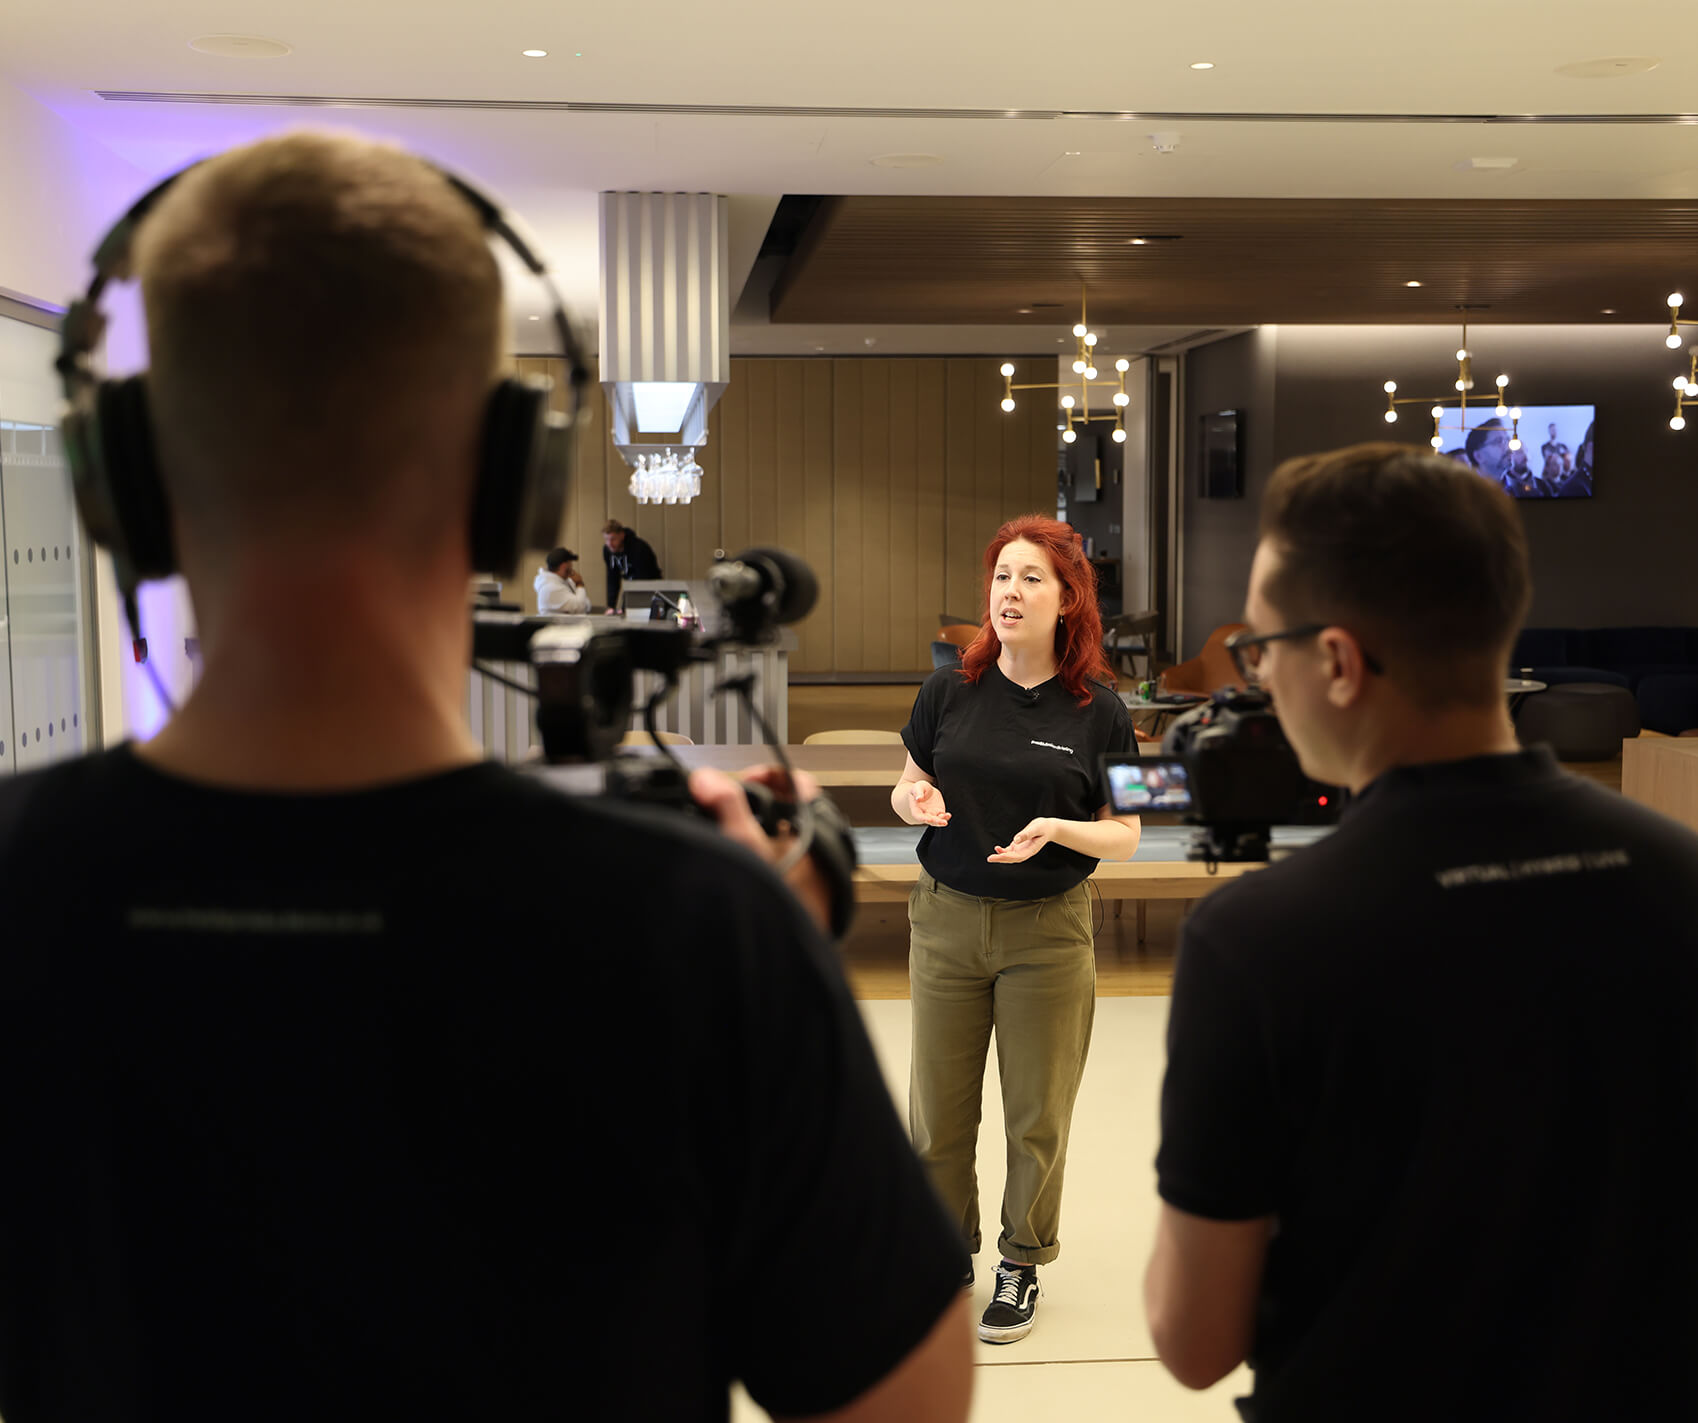 Corporate Videos: What Are They and What Can They Do for Your Business?